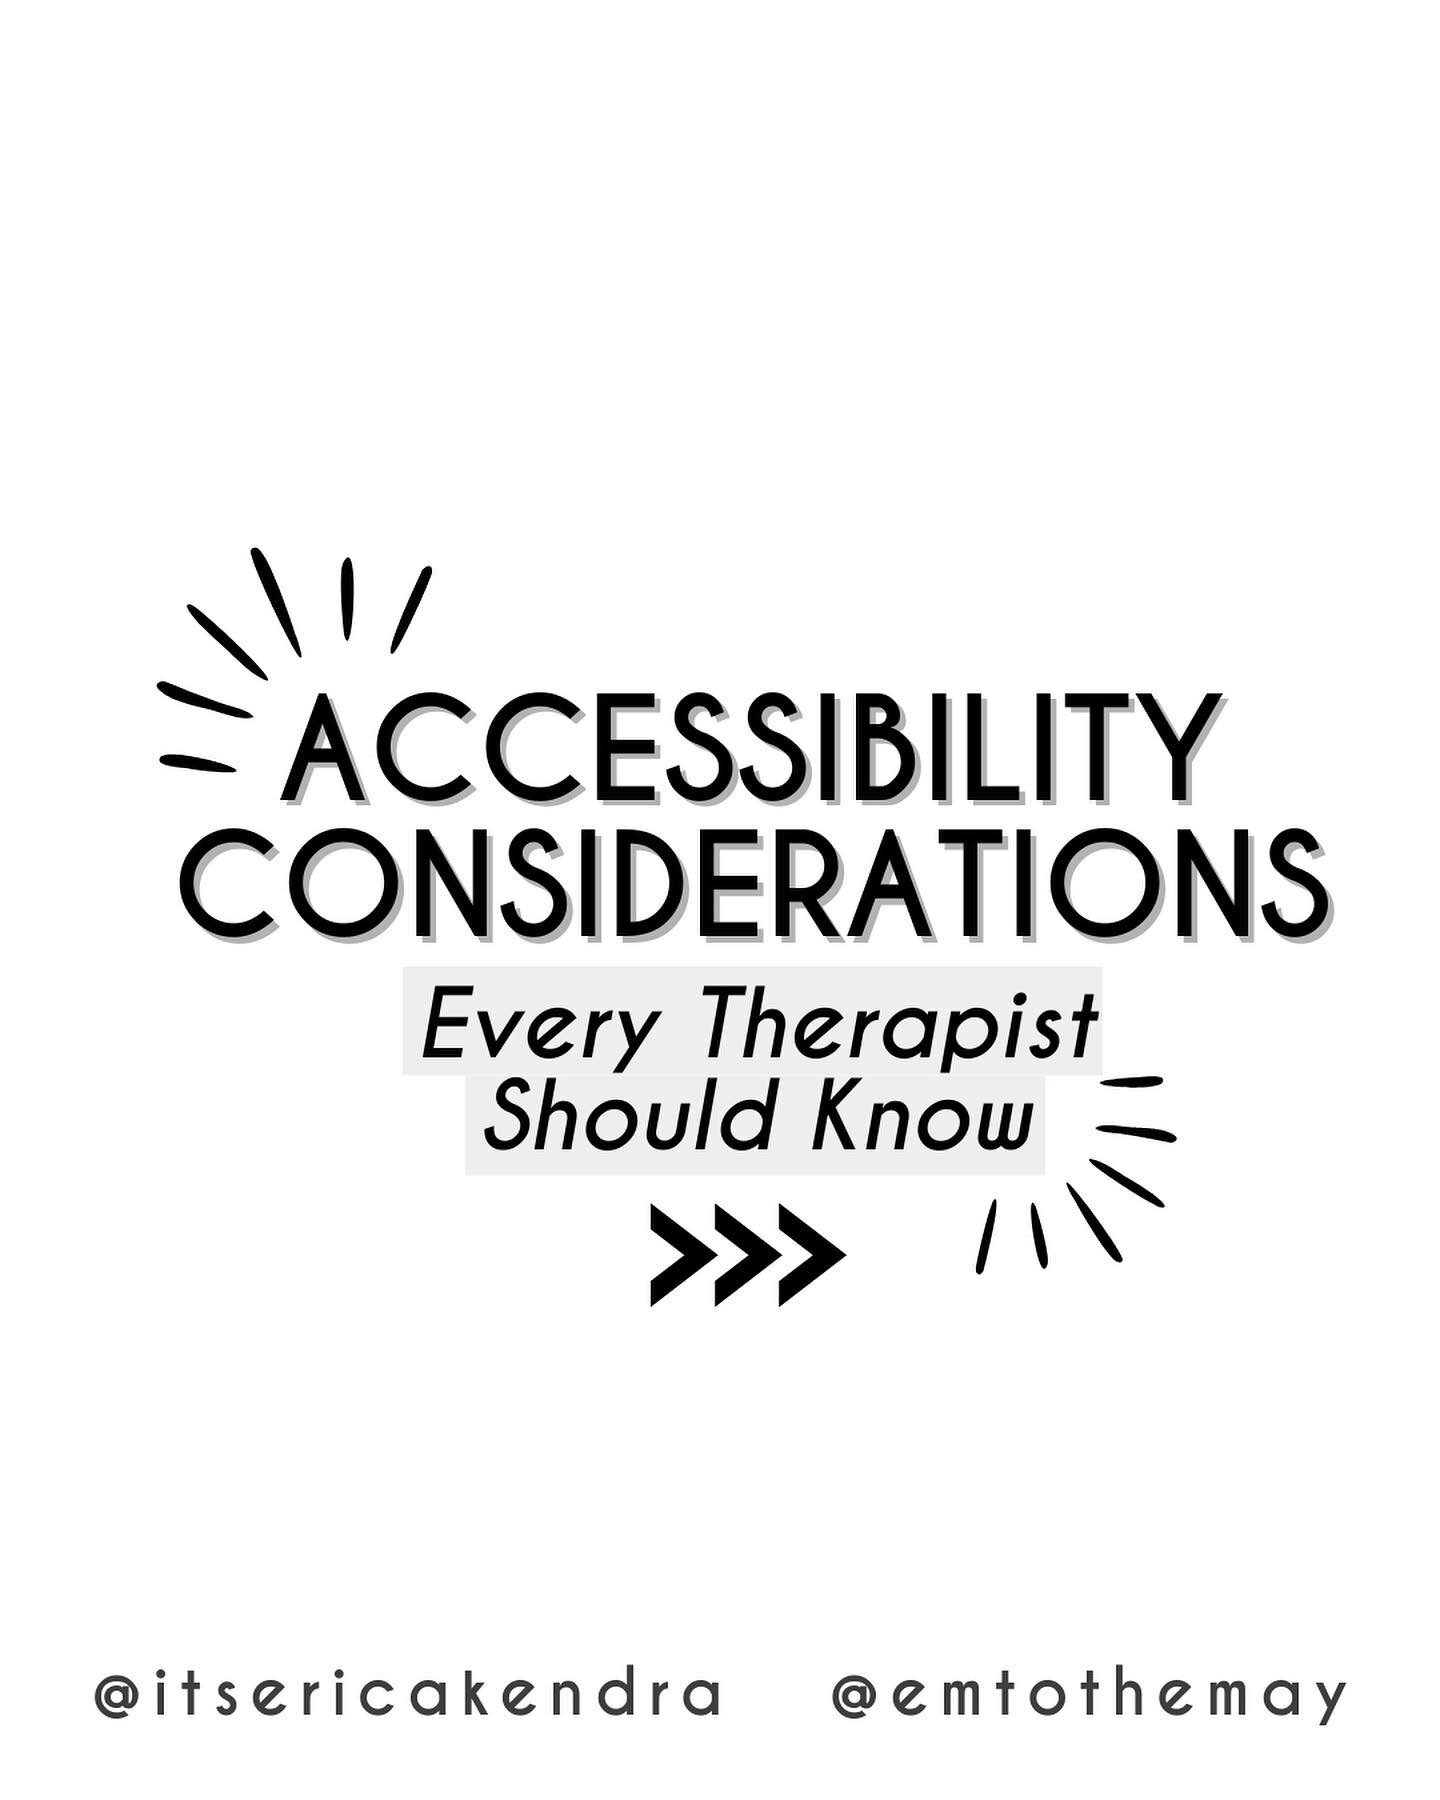 Here are some various thoughts we've had around rethinking accessibility... 

⚡Accessibility and equity are intrinsically connected...The fact of the matter is, without access there is no equity. Without equity, we will never be truly accessible. Yet